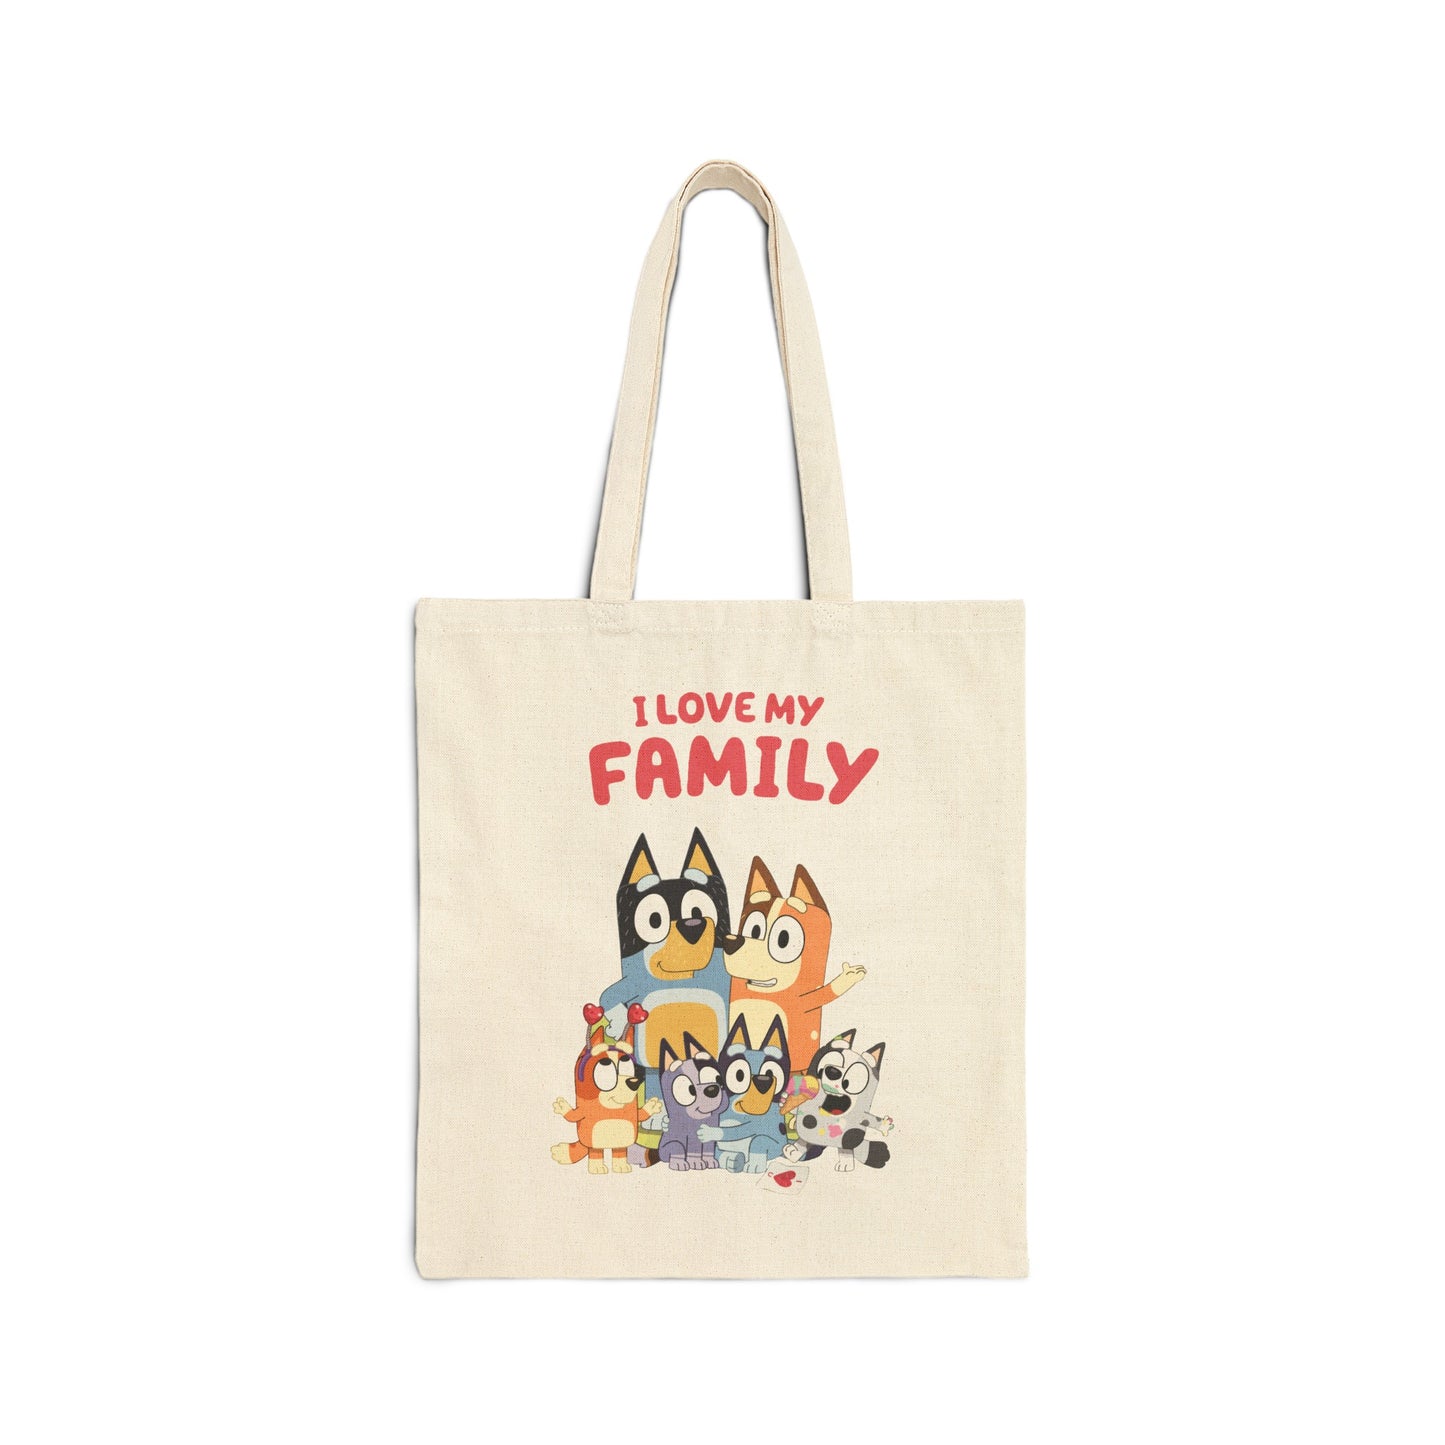 I Love My Family Cotton Canvas Tote Bag